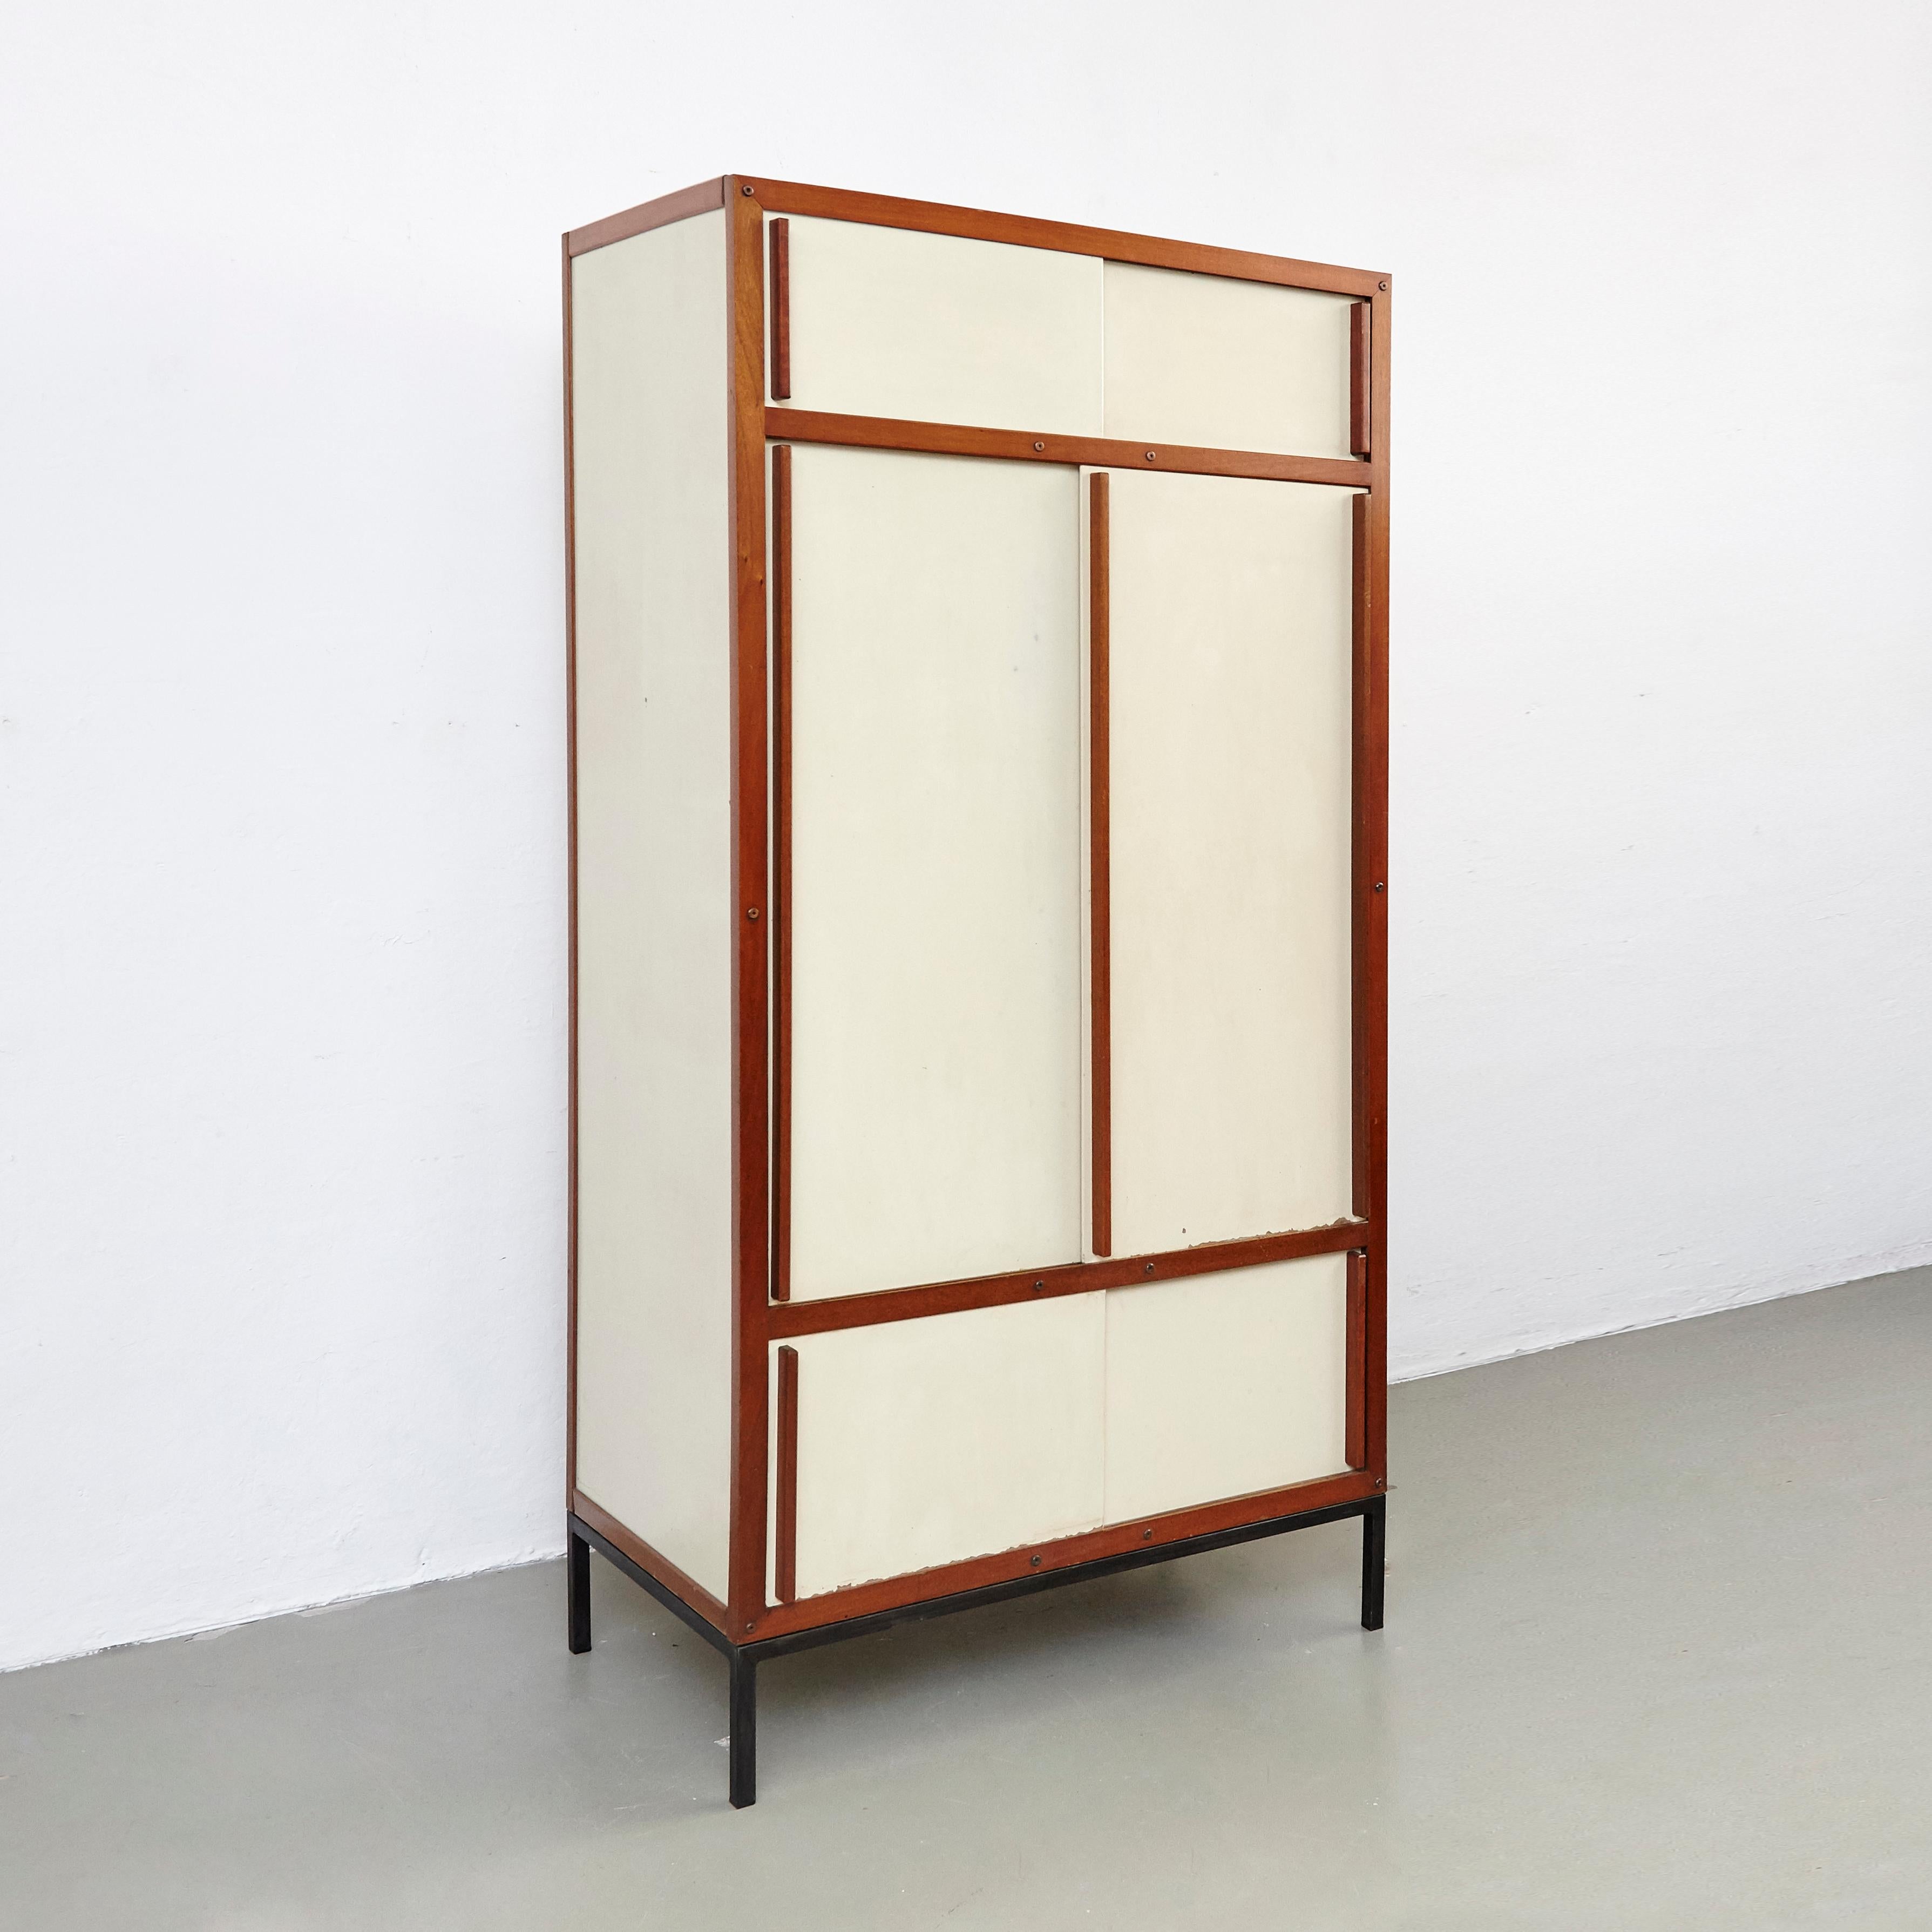 Cabinet designed by André Sornay.
Manufactured in France in 1950s.

In original condition with minor wear consistent with age and use, preserving a beautiful patina.
The metal base structure is redone.

André Sornay (France, 1902–2000) joined